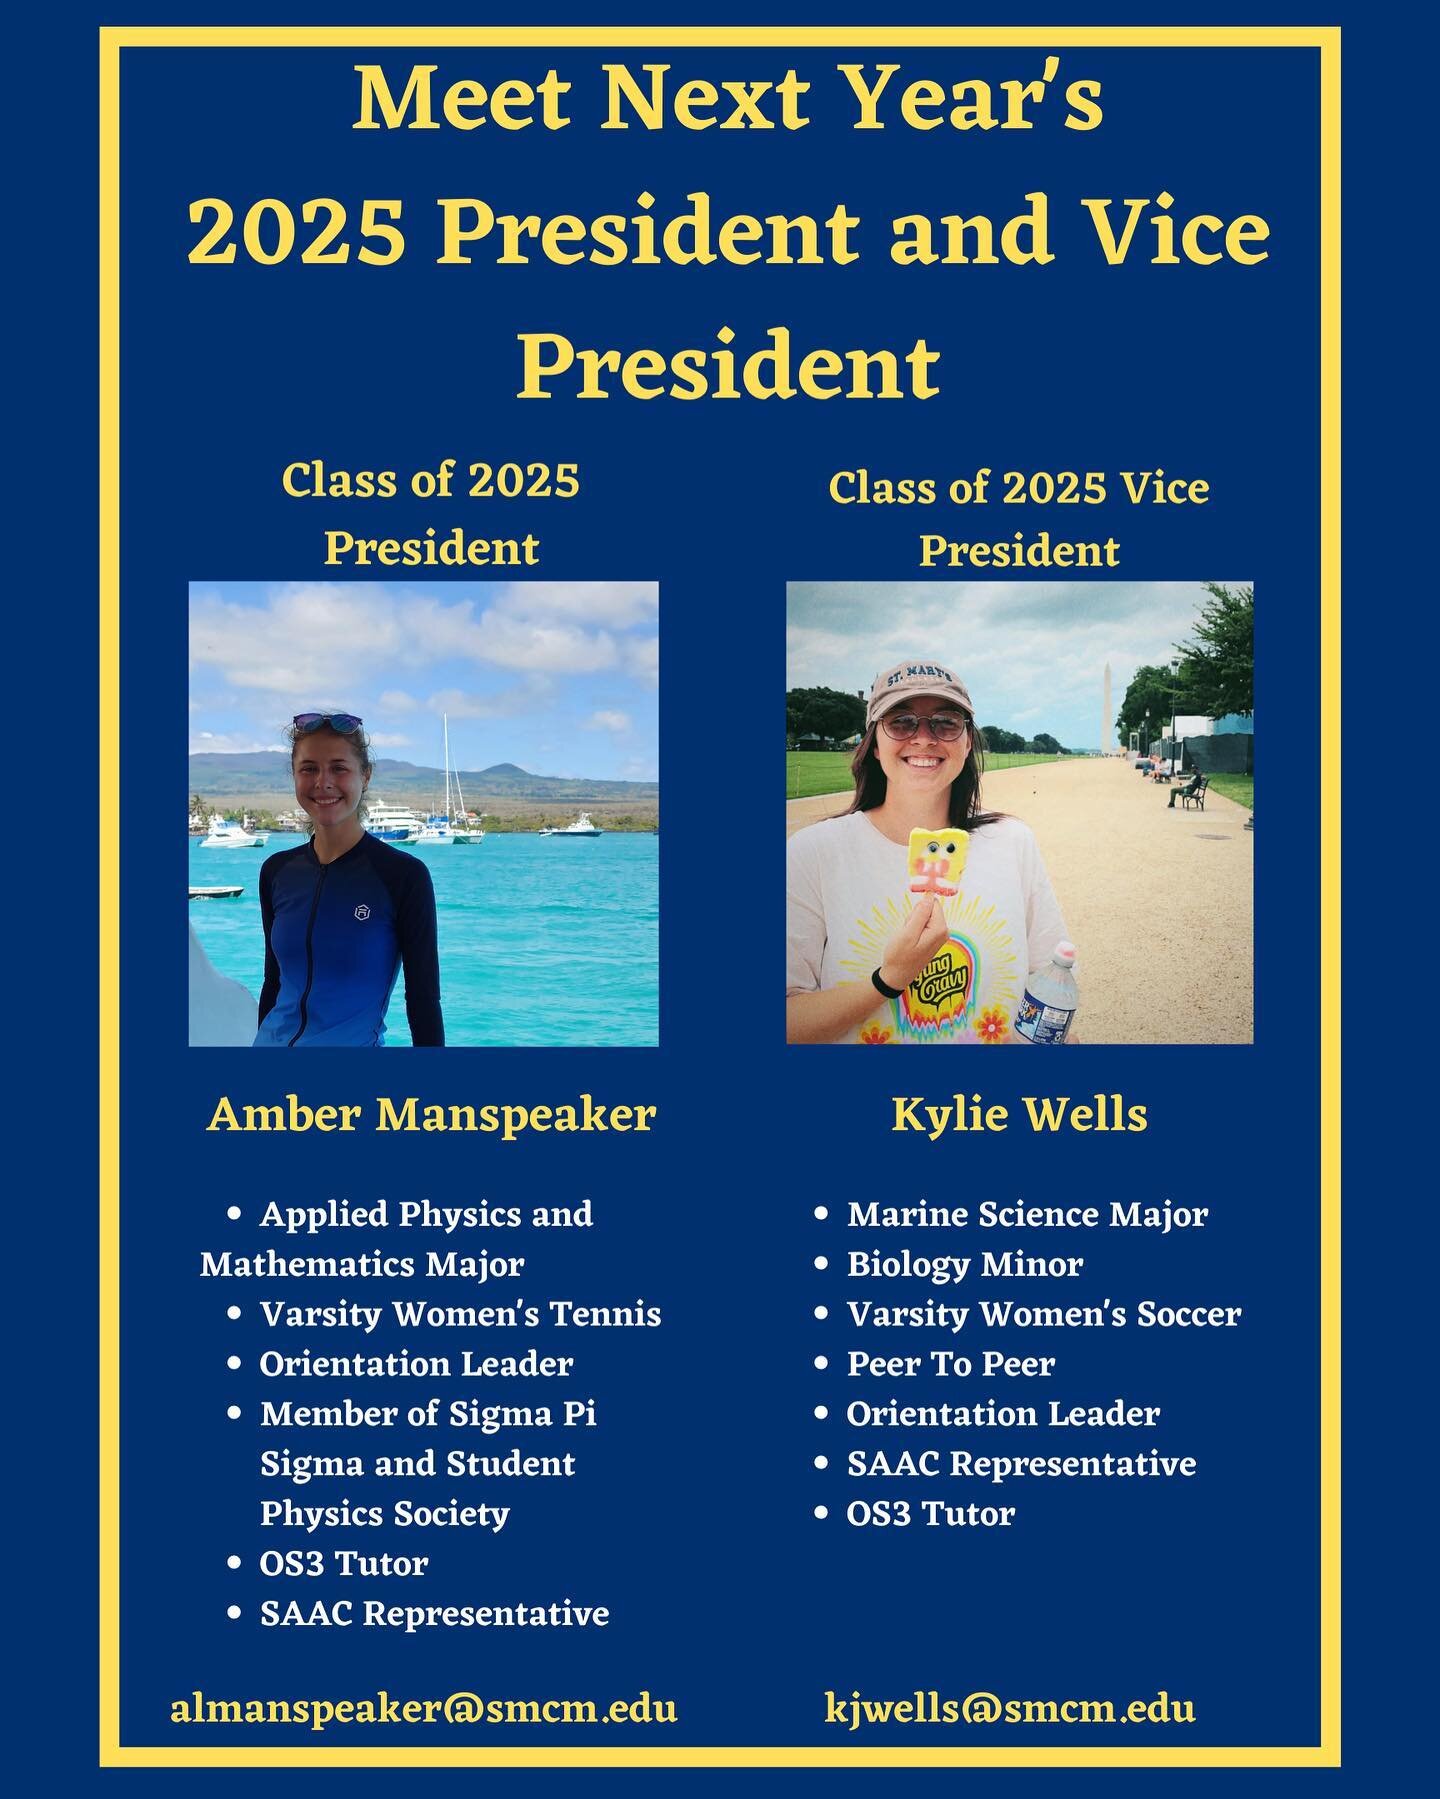 Meet your Class of 2025 President and Vice President for next year! Amber Manspeaker and Kylie Wells are both eager to serve the class of 2025. Some main focuses of the pair involve accessibility, transparency, and inclusion. 

When Amber is not on t